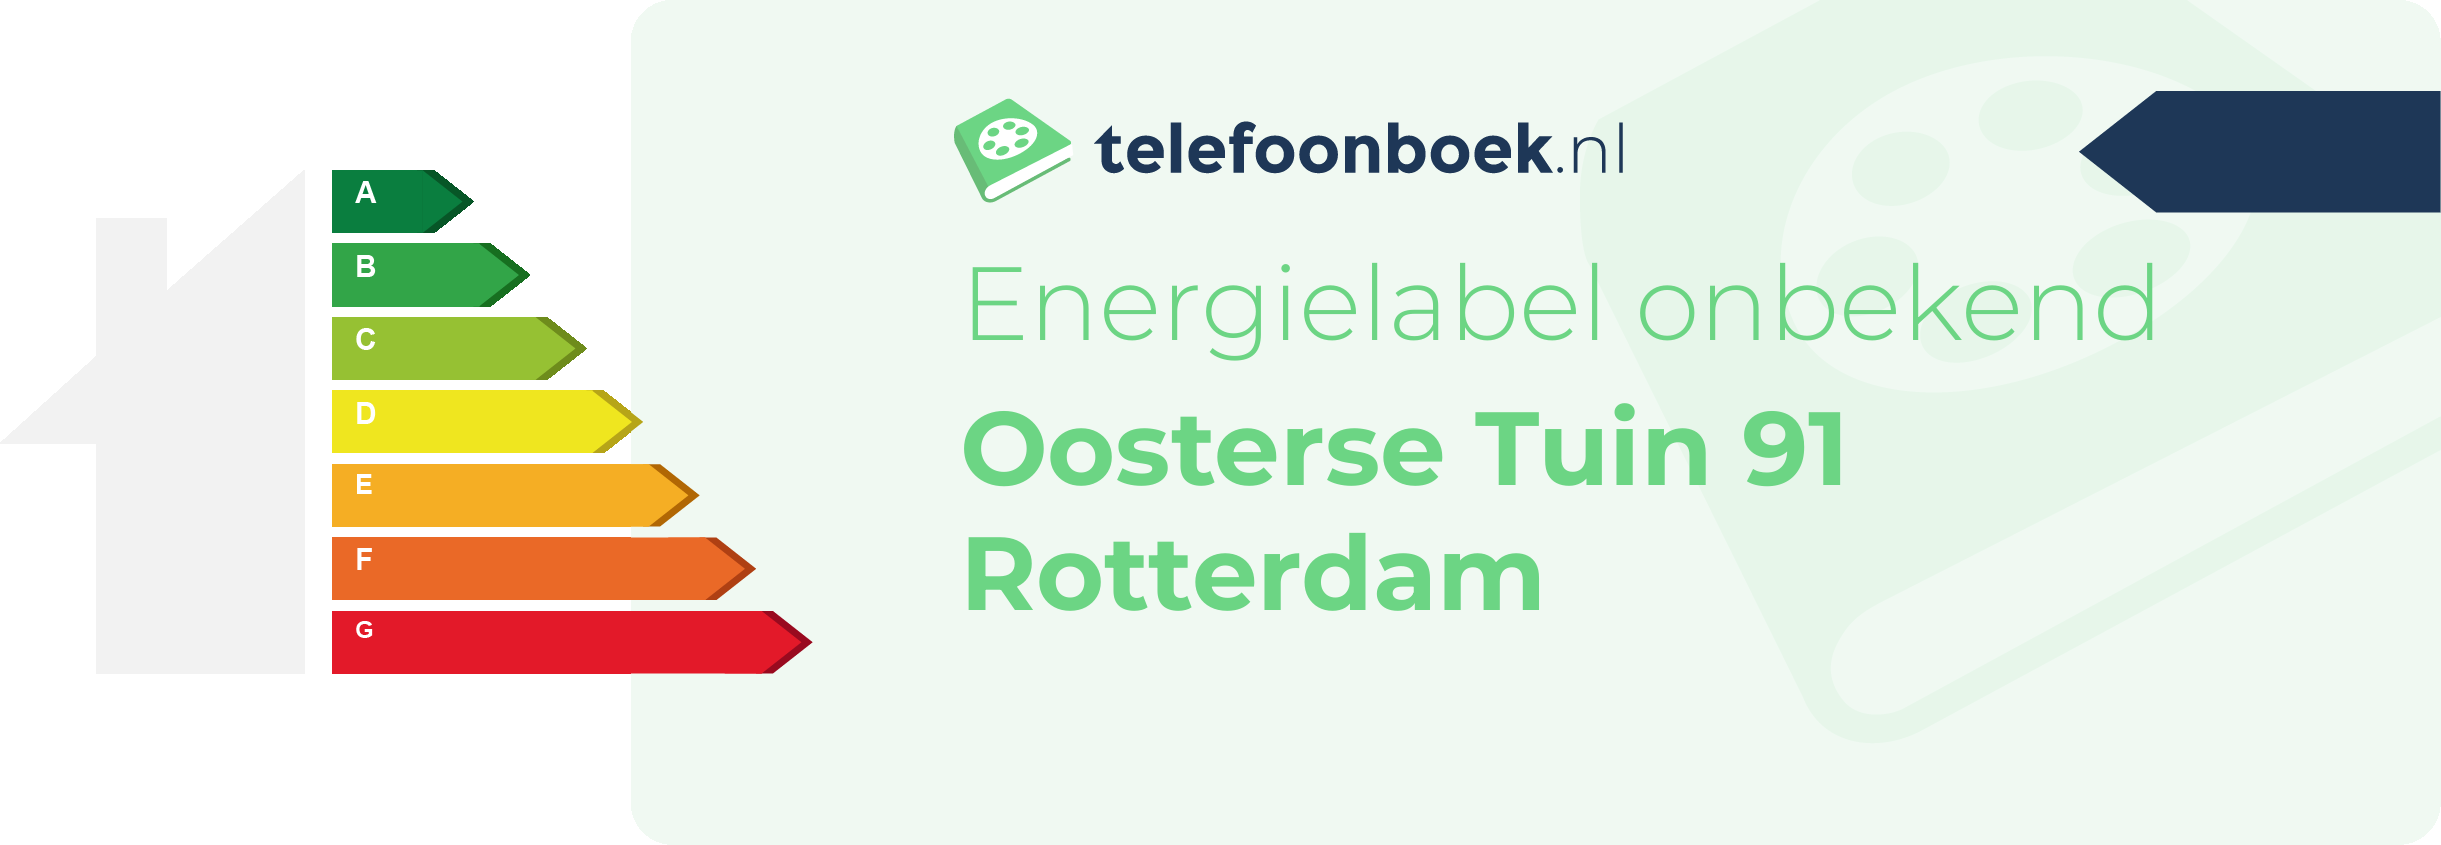 Energielabel Oosterse Tuin 91 Rotterdam